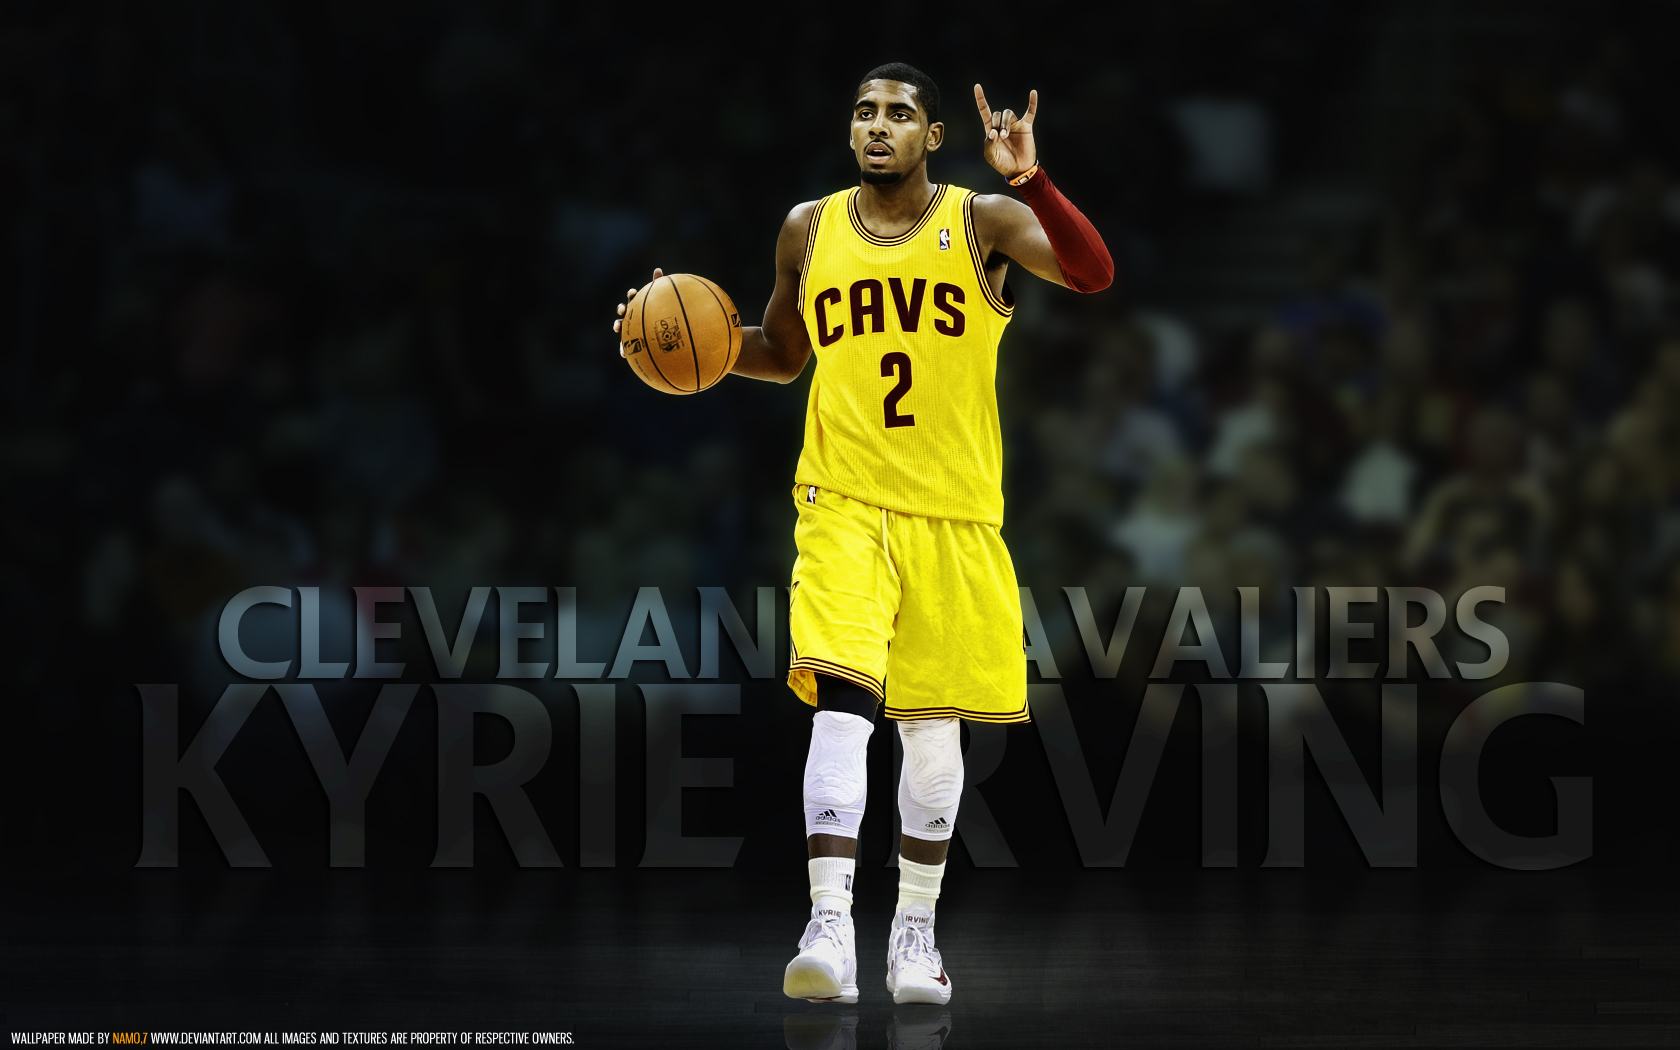 Kyrie Irving Cleveland Cavaliers By Namo 445578gfx On